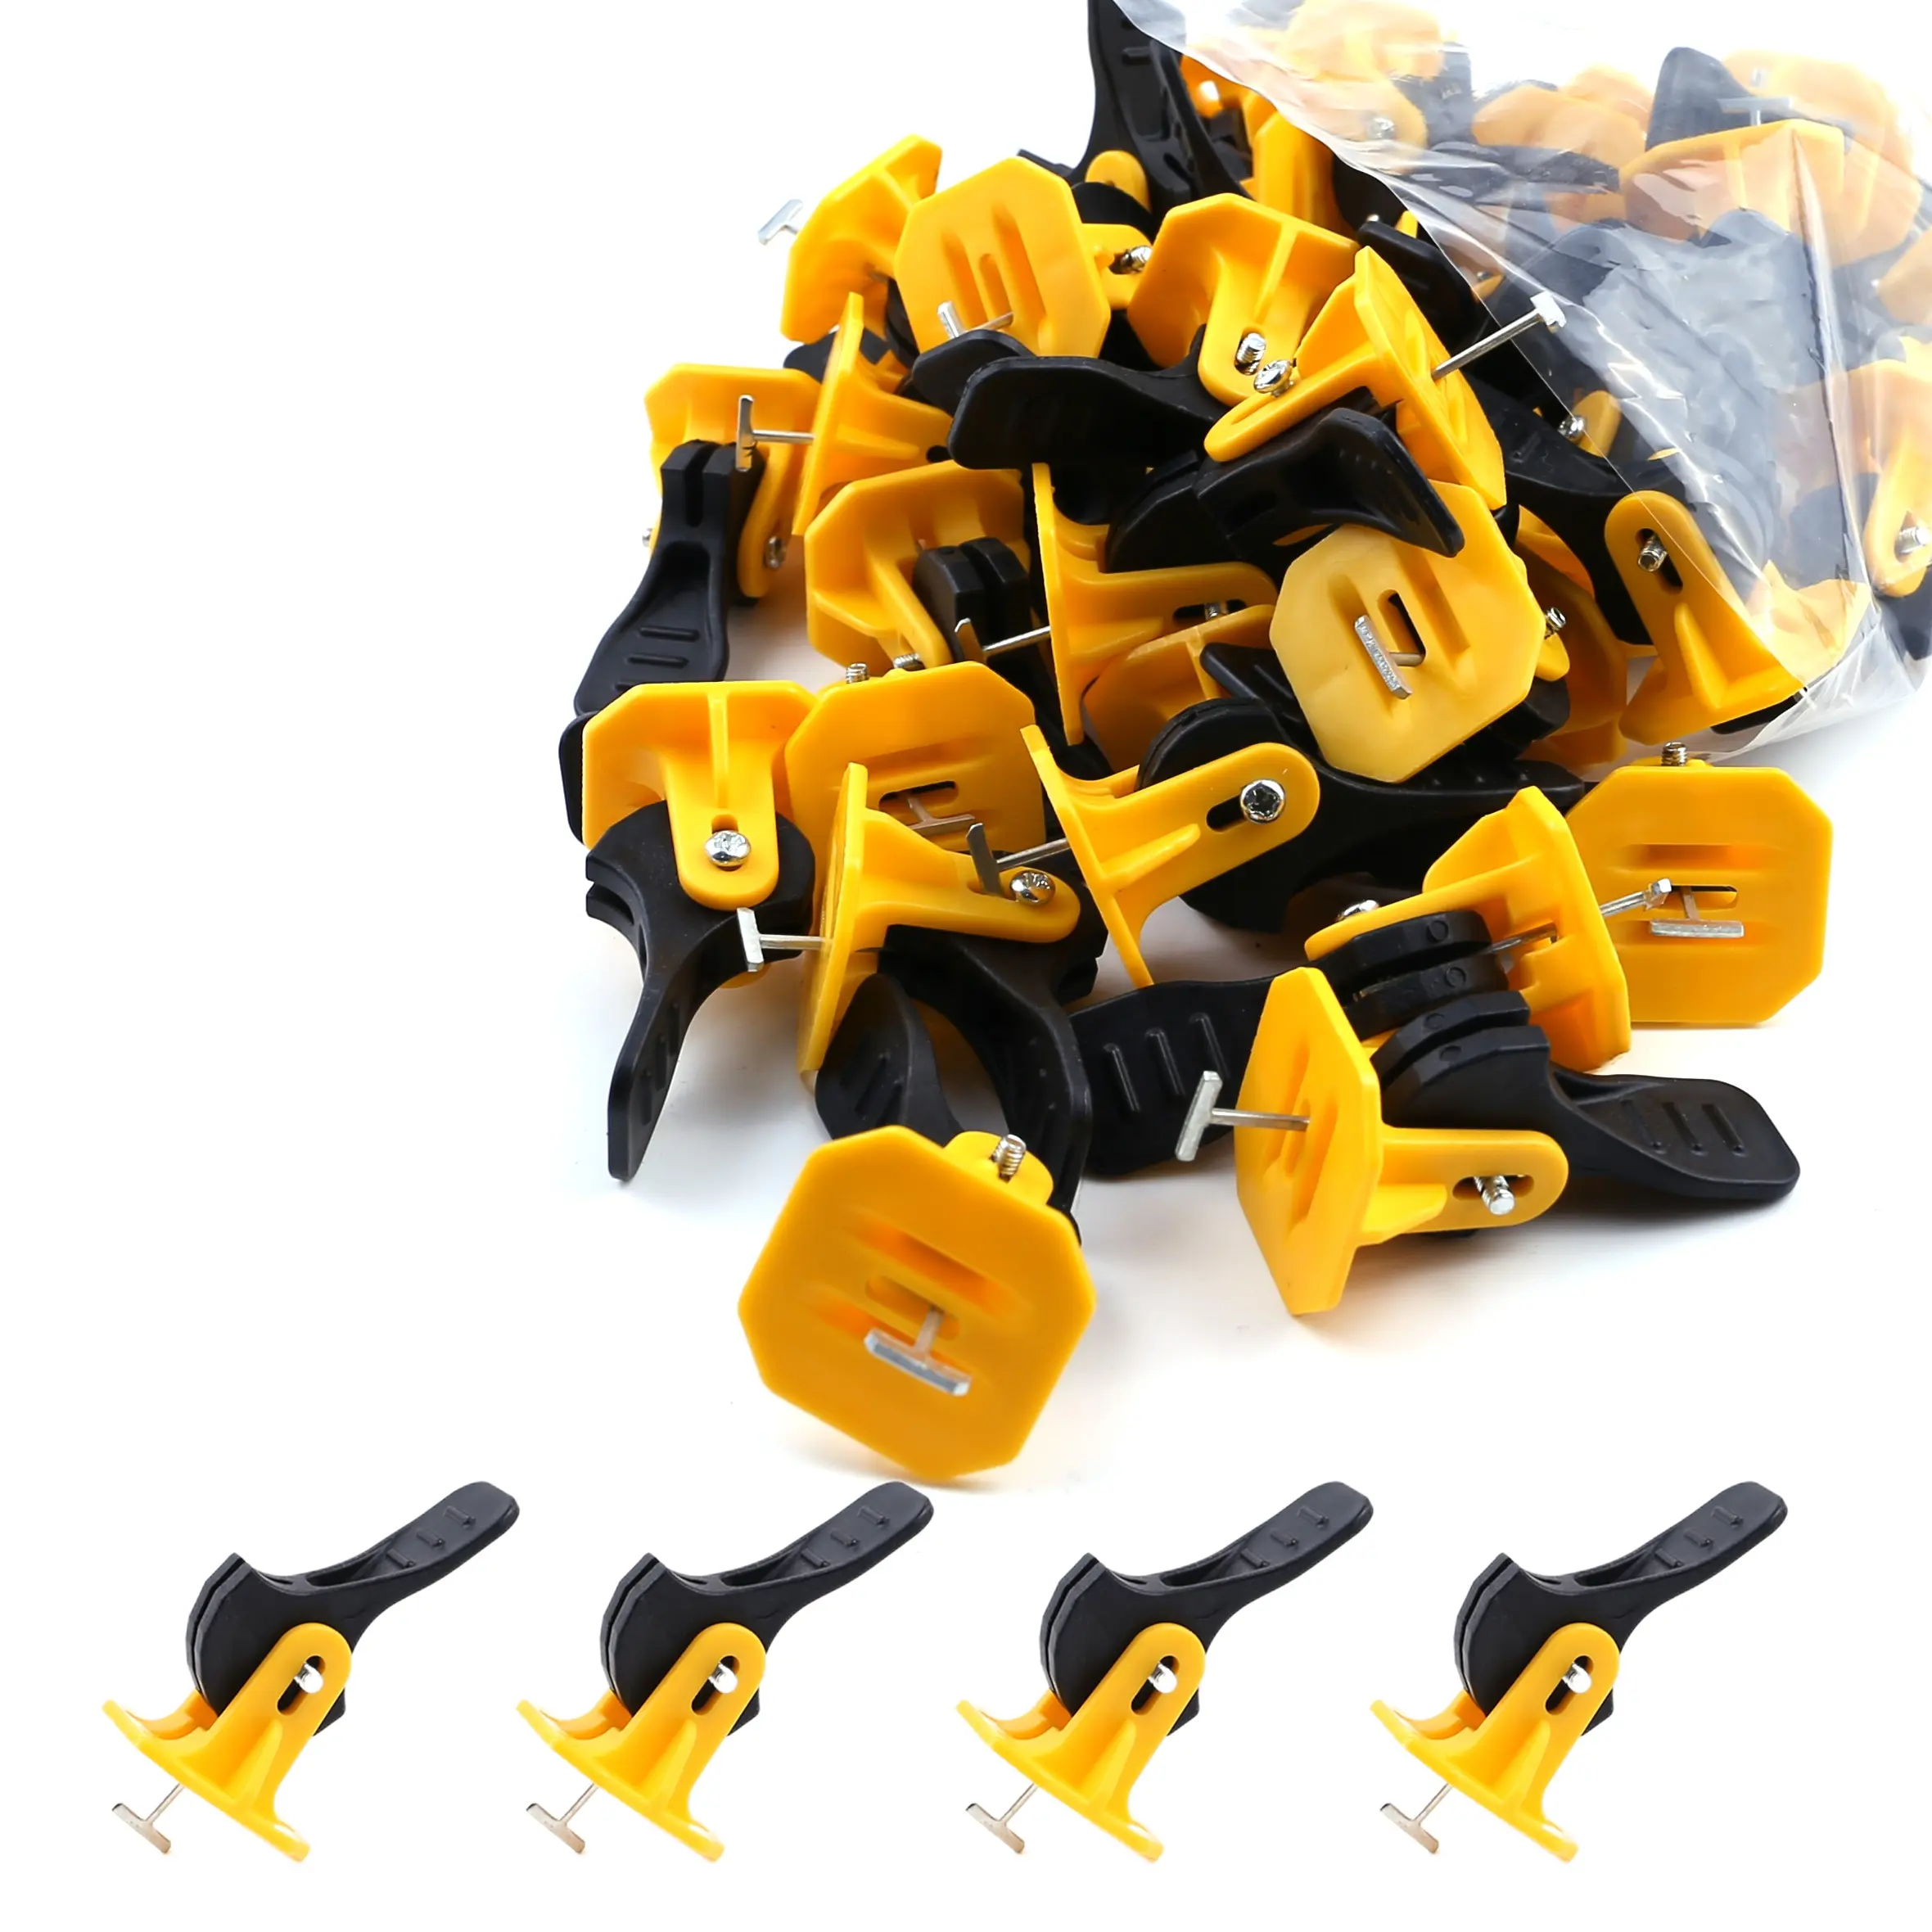 1.5mm Flat Wall Floor Construction Positioning Artifacts Tile Leveler Locator Spacers Adjuster Tool Tile Leveling System Clips